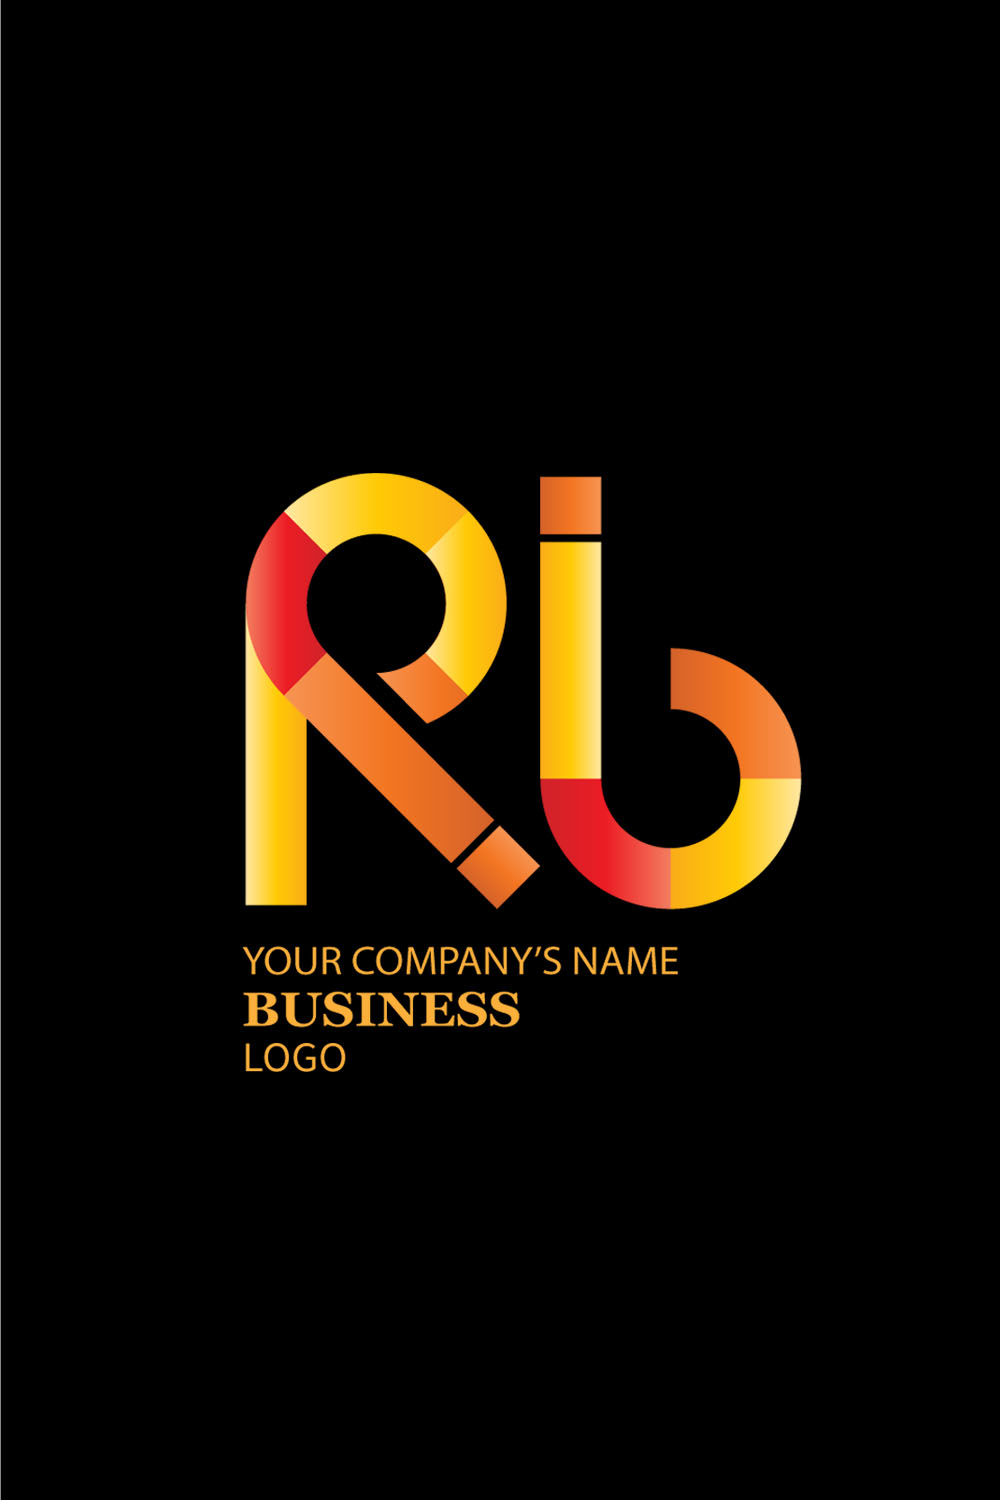 Image of Rb letter logo with irresistible design